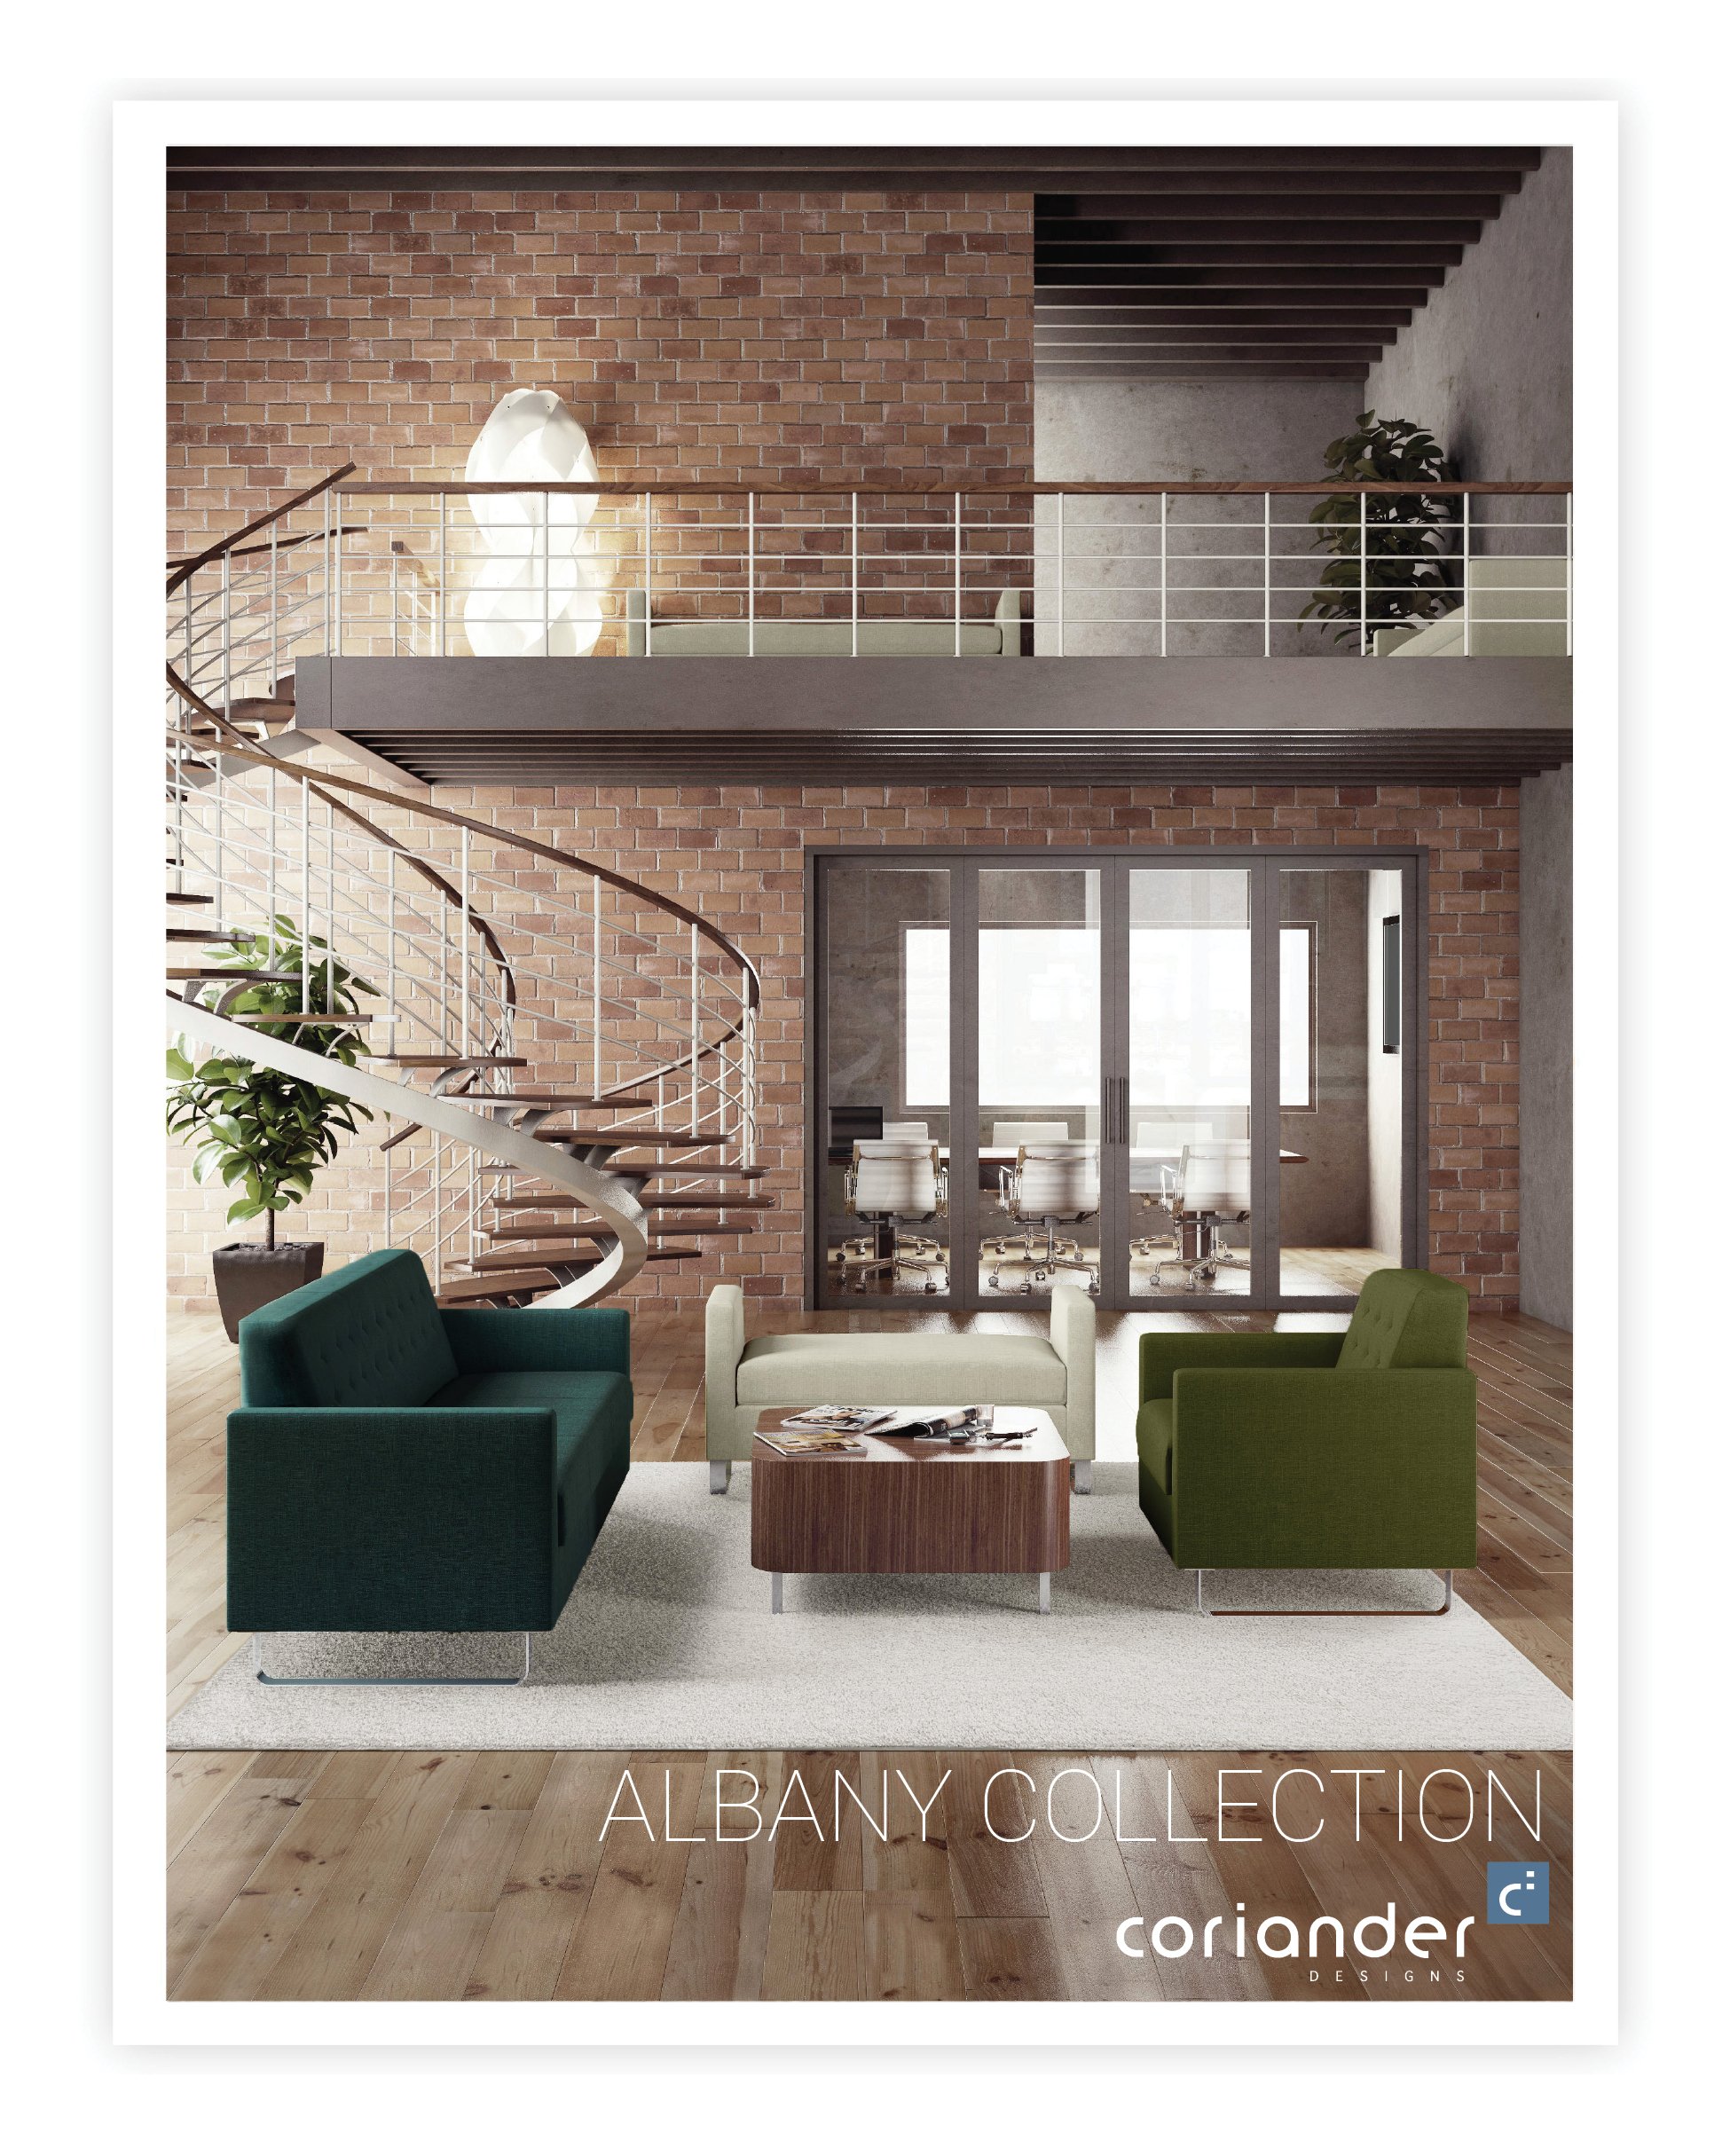 ALBANY COLLECTION